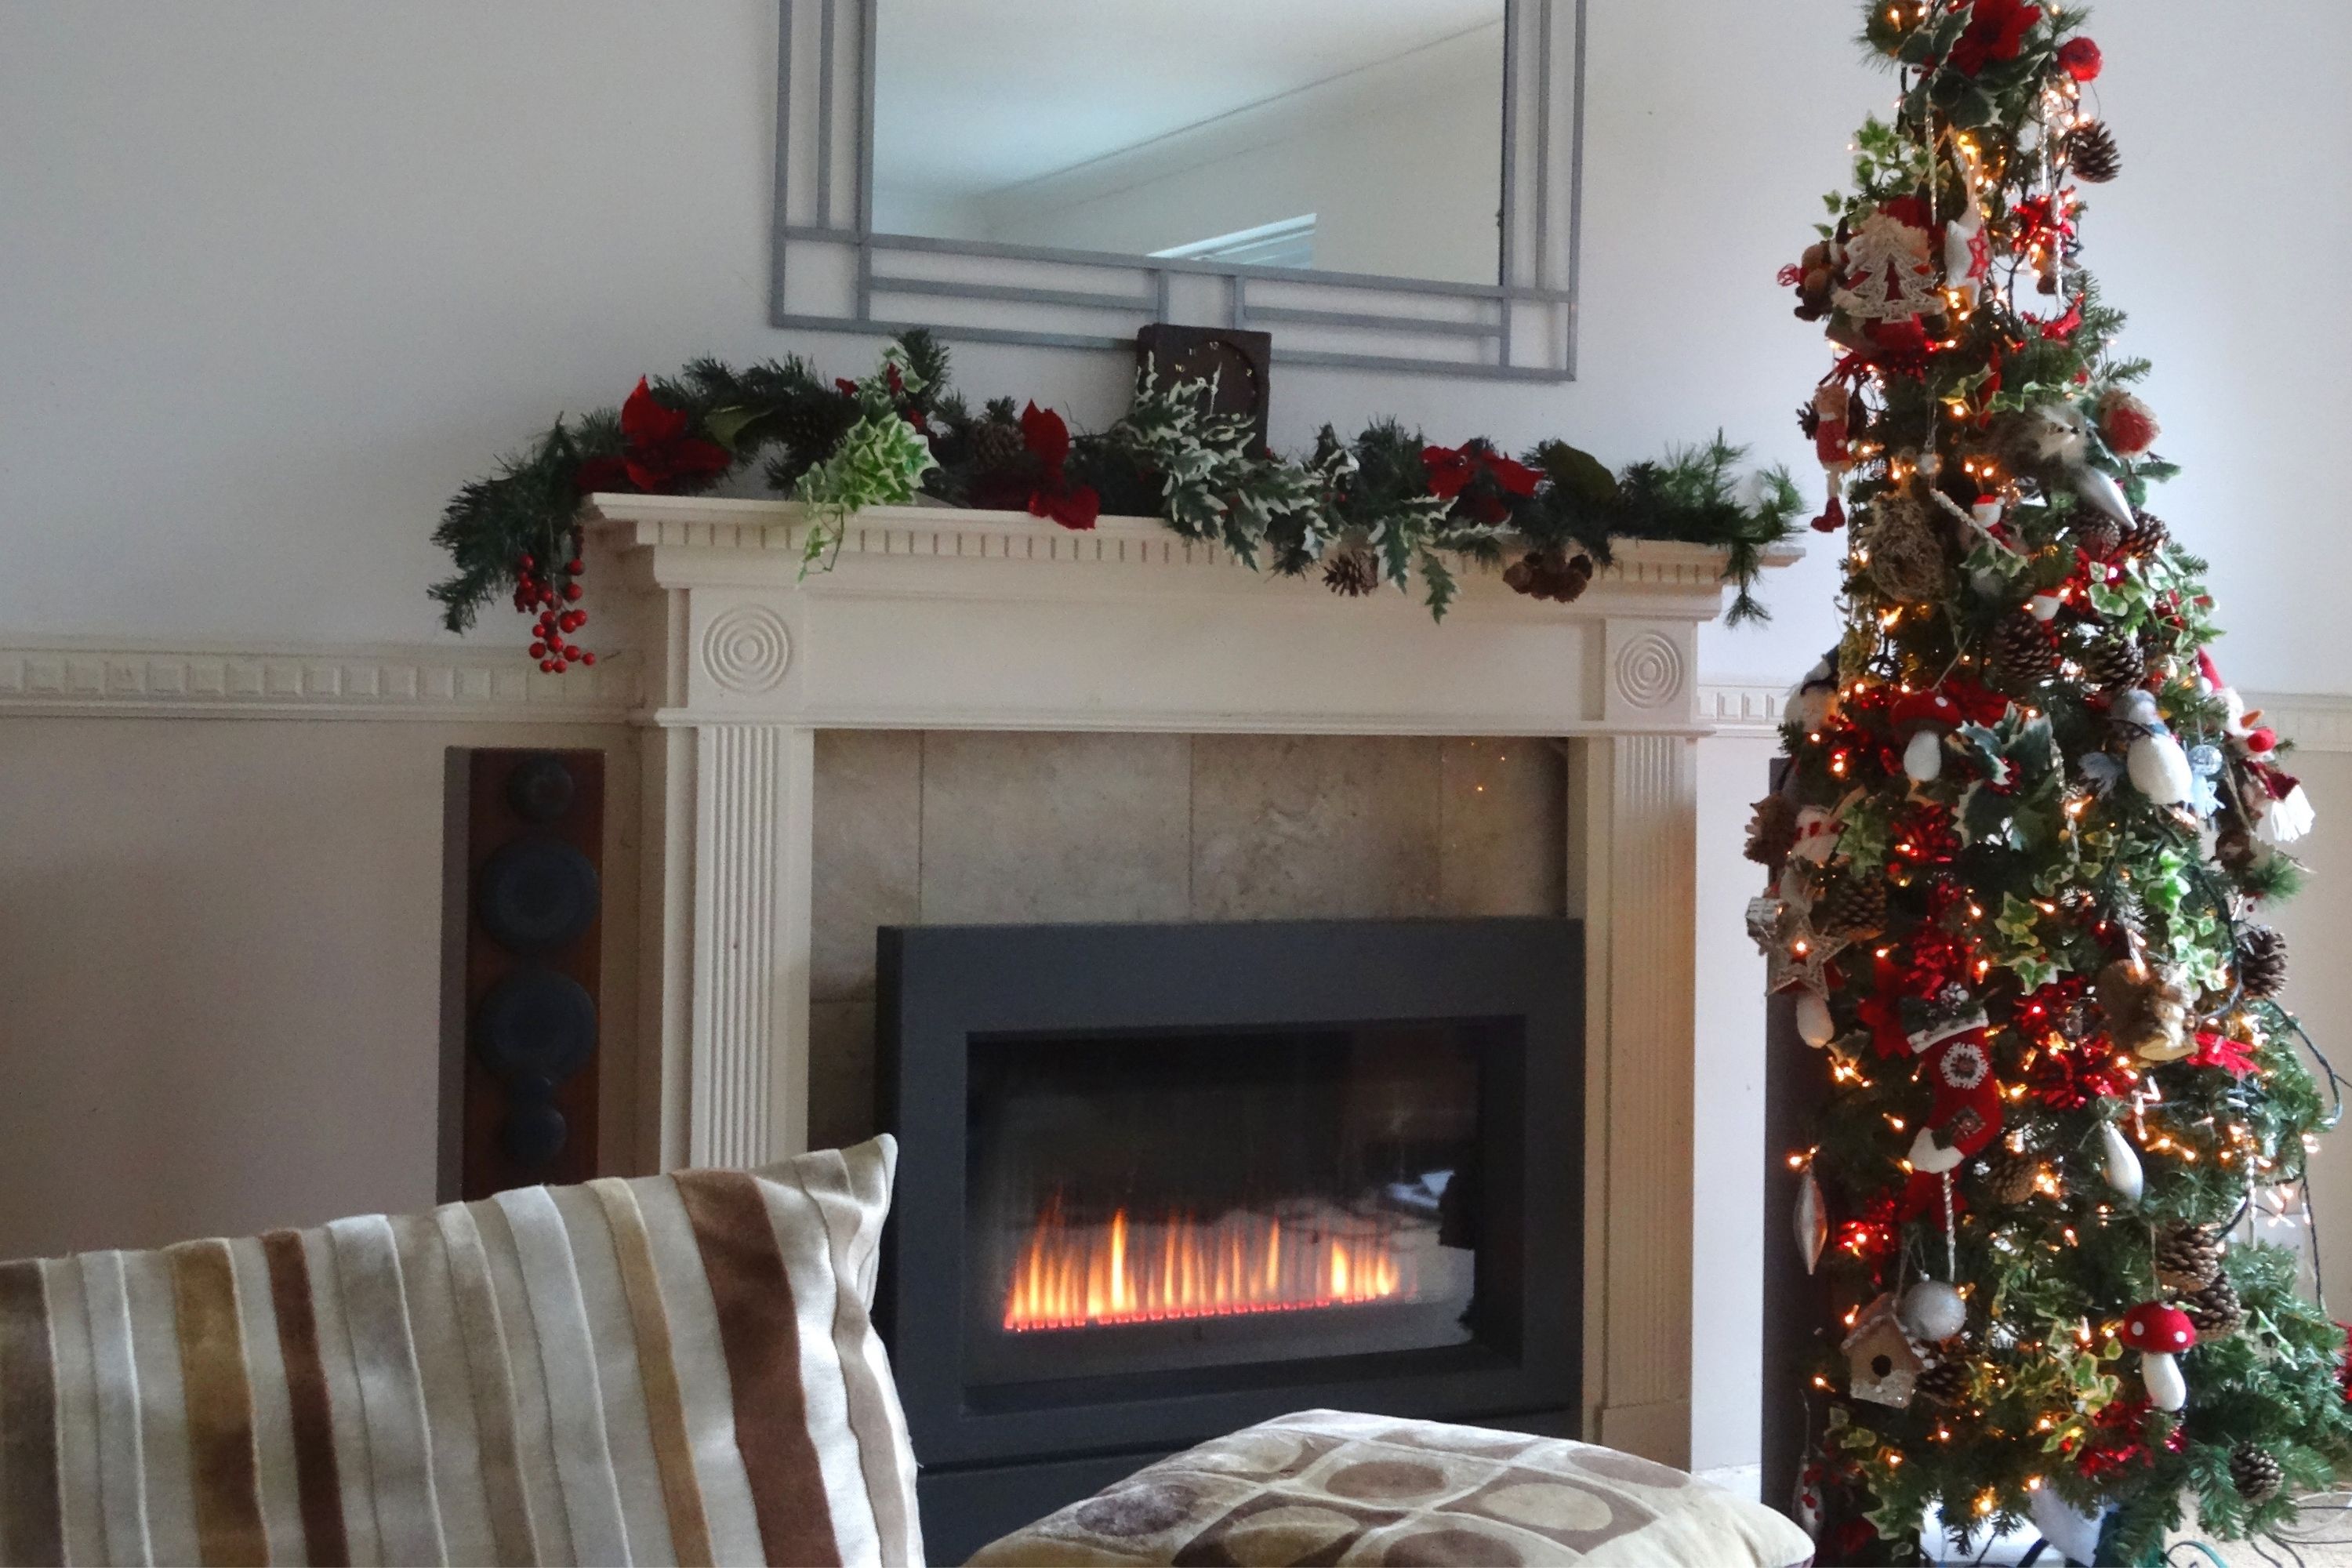 Consider Buying And Installing Fireplace Glass Doors